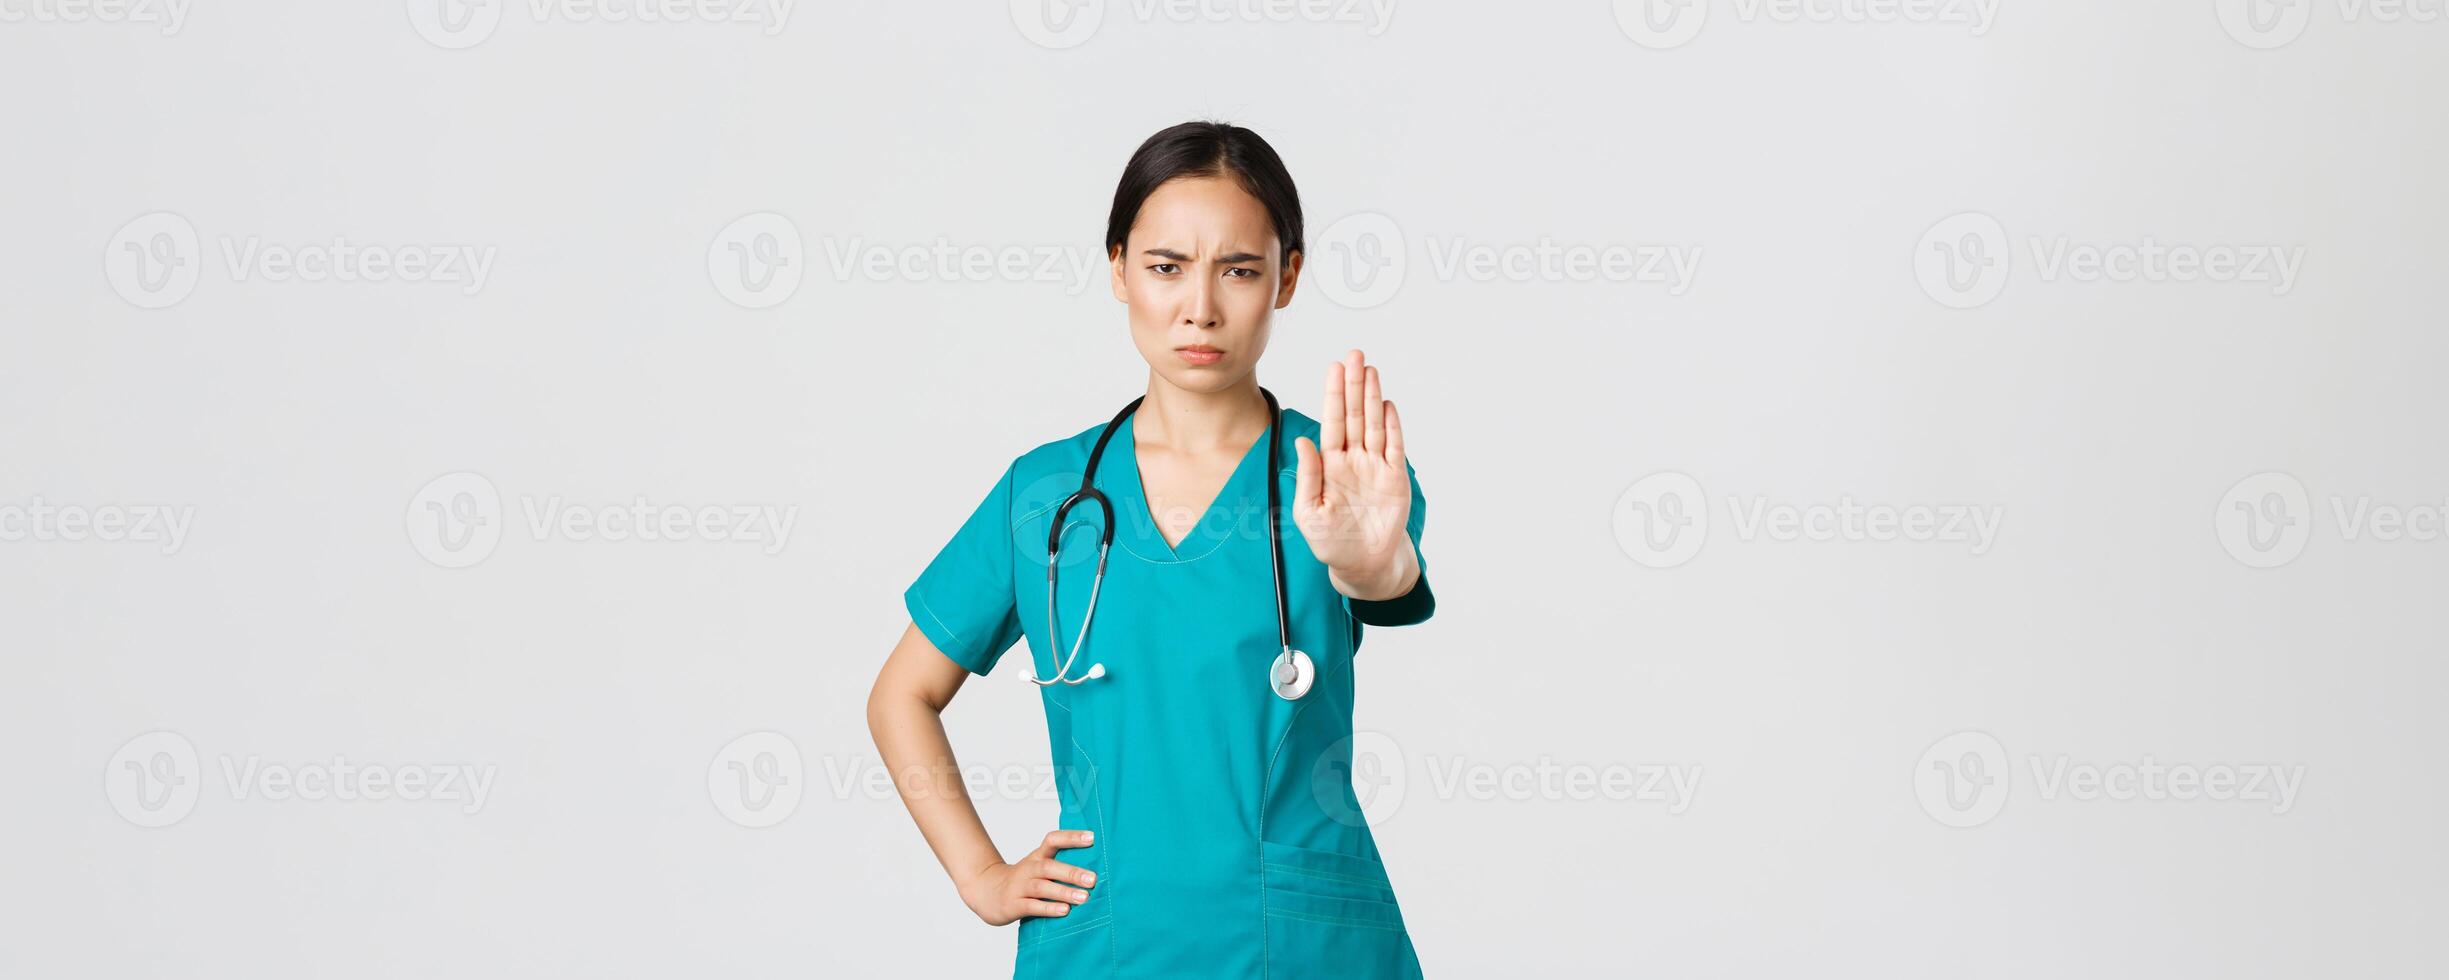 Covid-19, healthcare workers, pandemic concept. Angry serious-looking asian doctor, female physician or nurse in scrubs frowning displeased, extend hand to show stop, disagree, prohibit or forbid photo